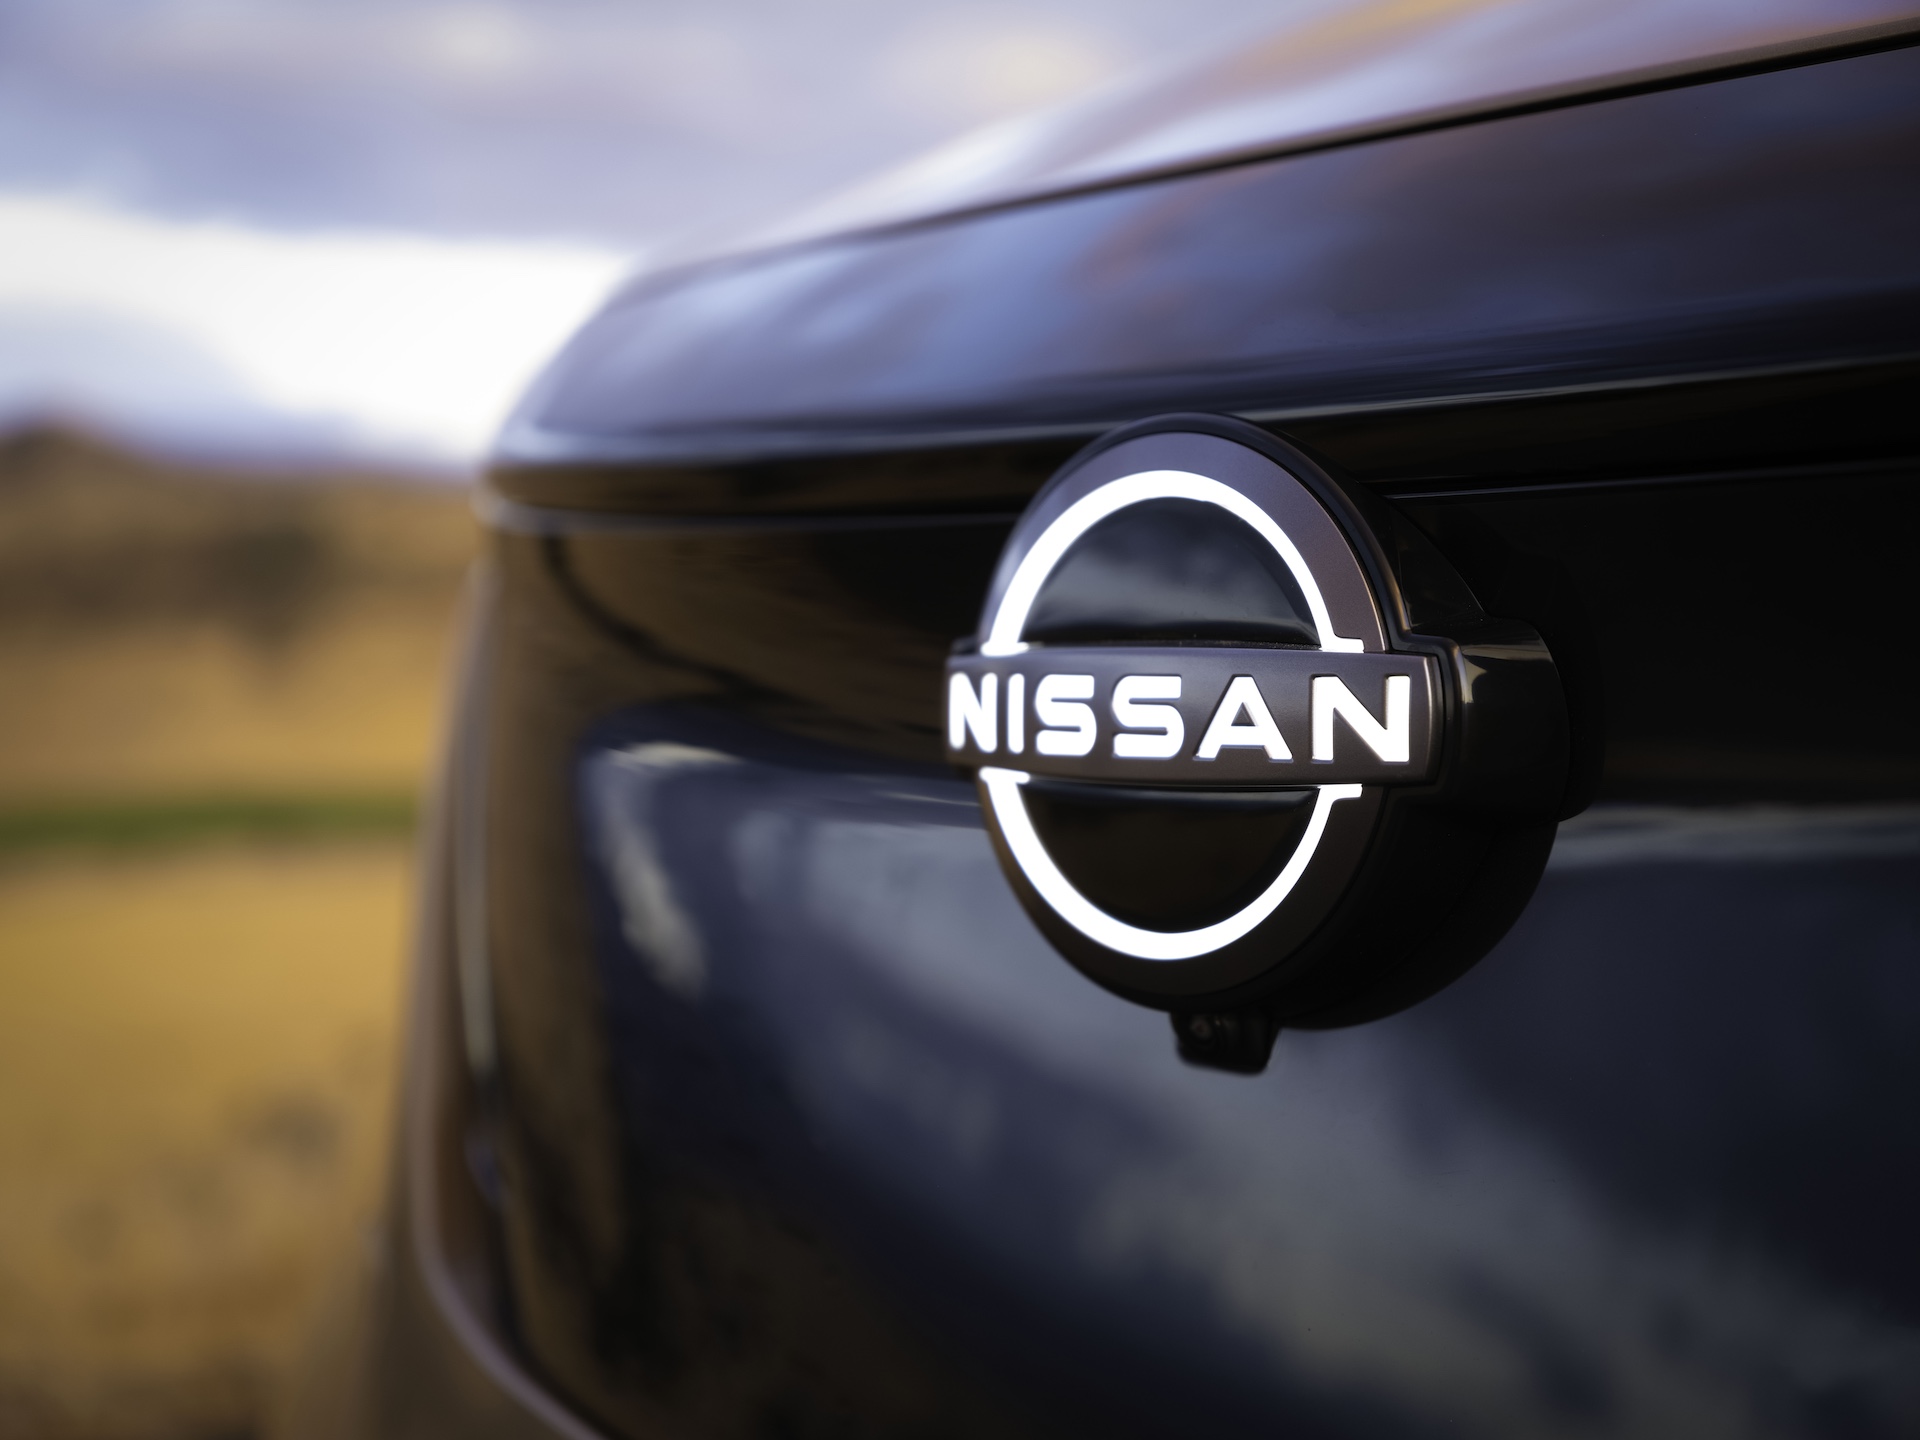 Honda and Nissan look to partner on EVs, software Auto Recent